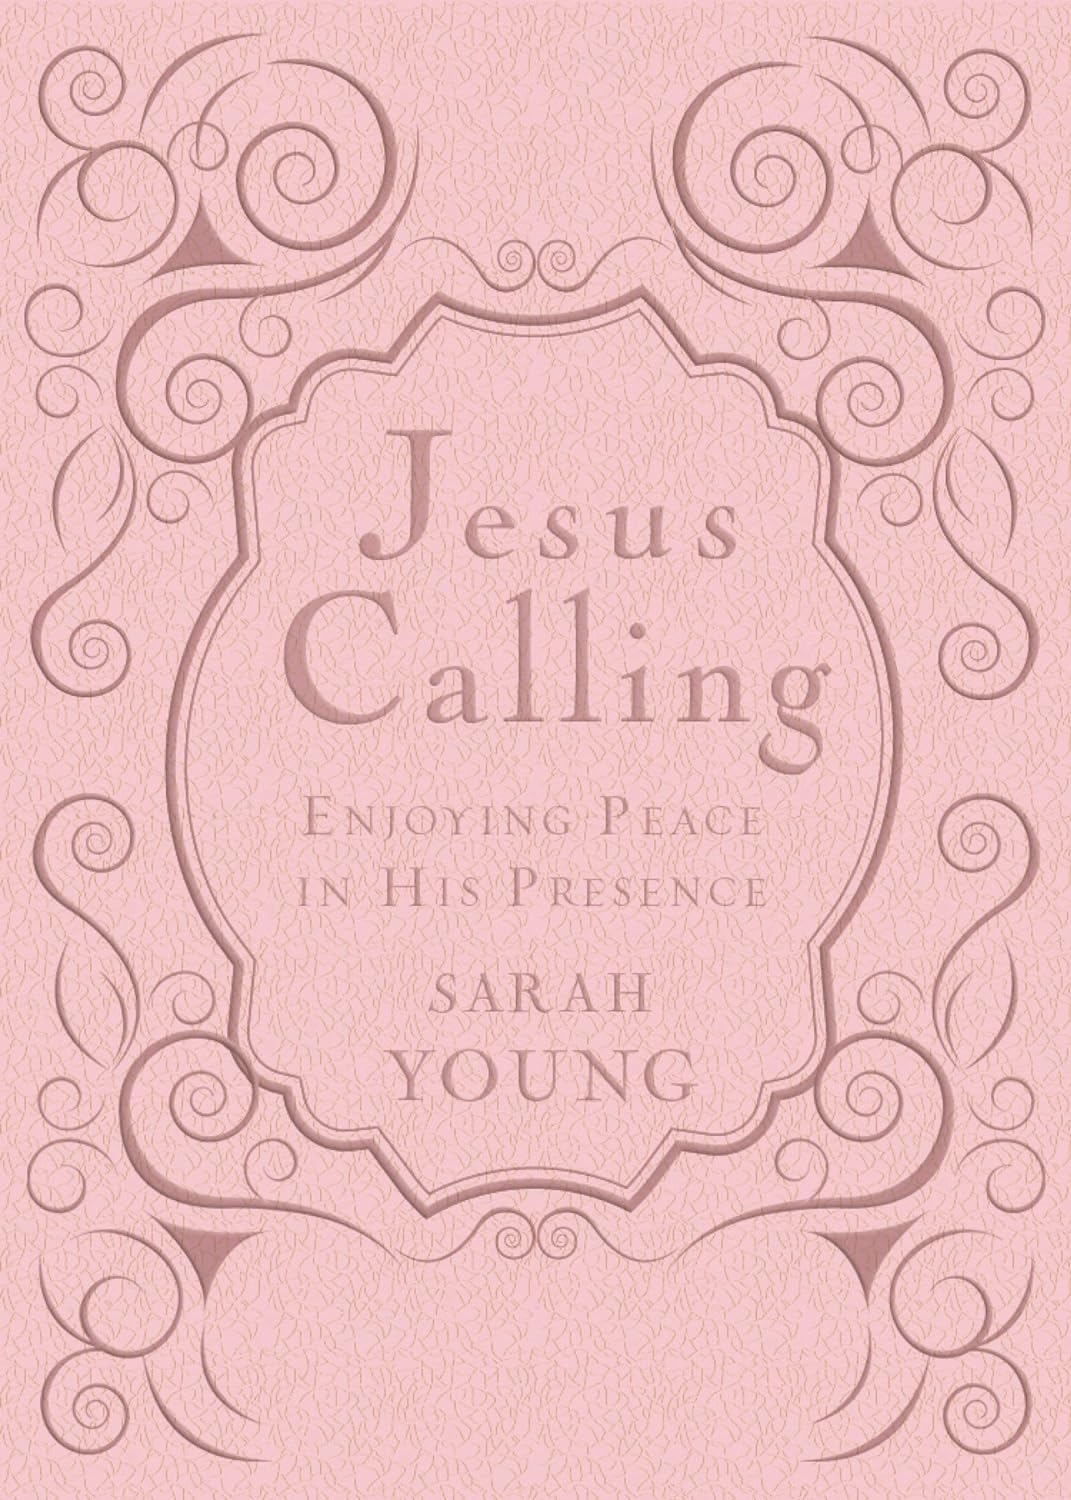 Jesus Calling - Pink Soft Leather